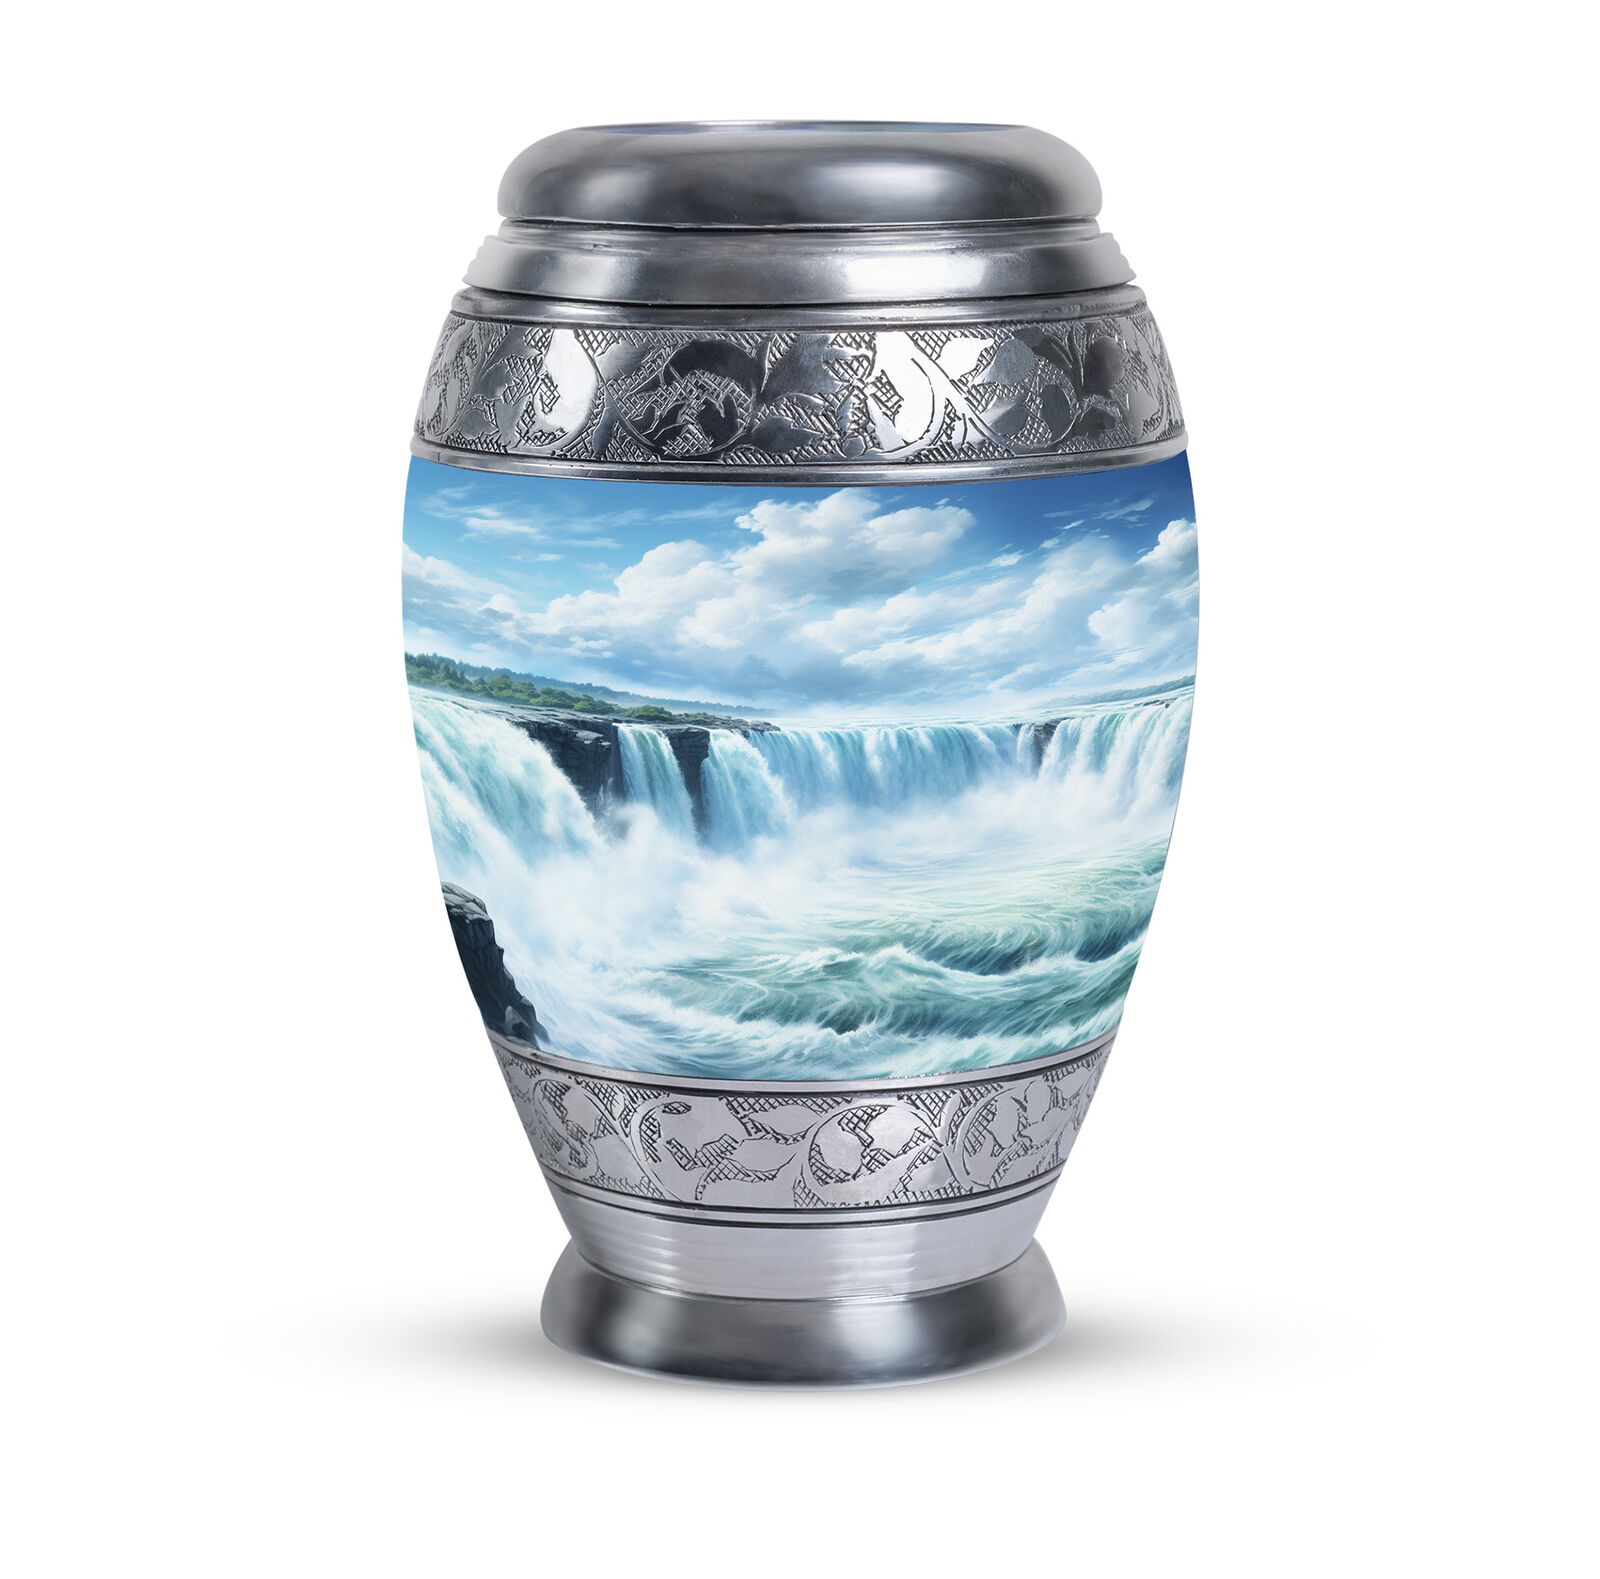 Adult Funeral Urn Waterfall At Moning (10 Inch) Large Urn